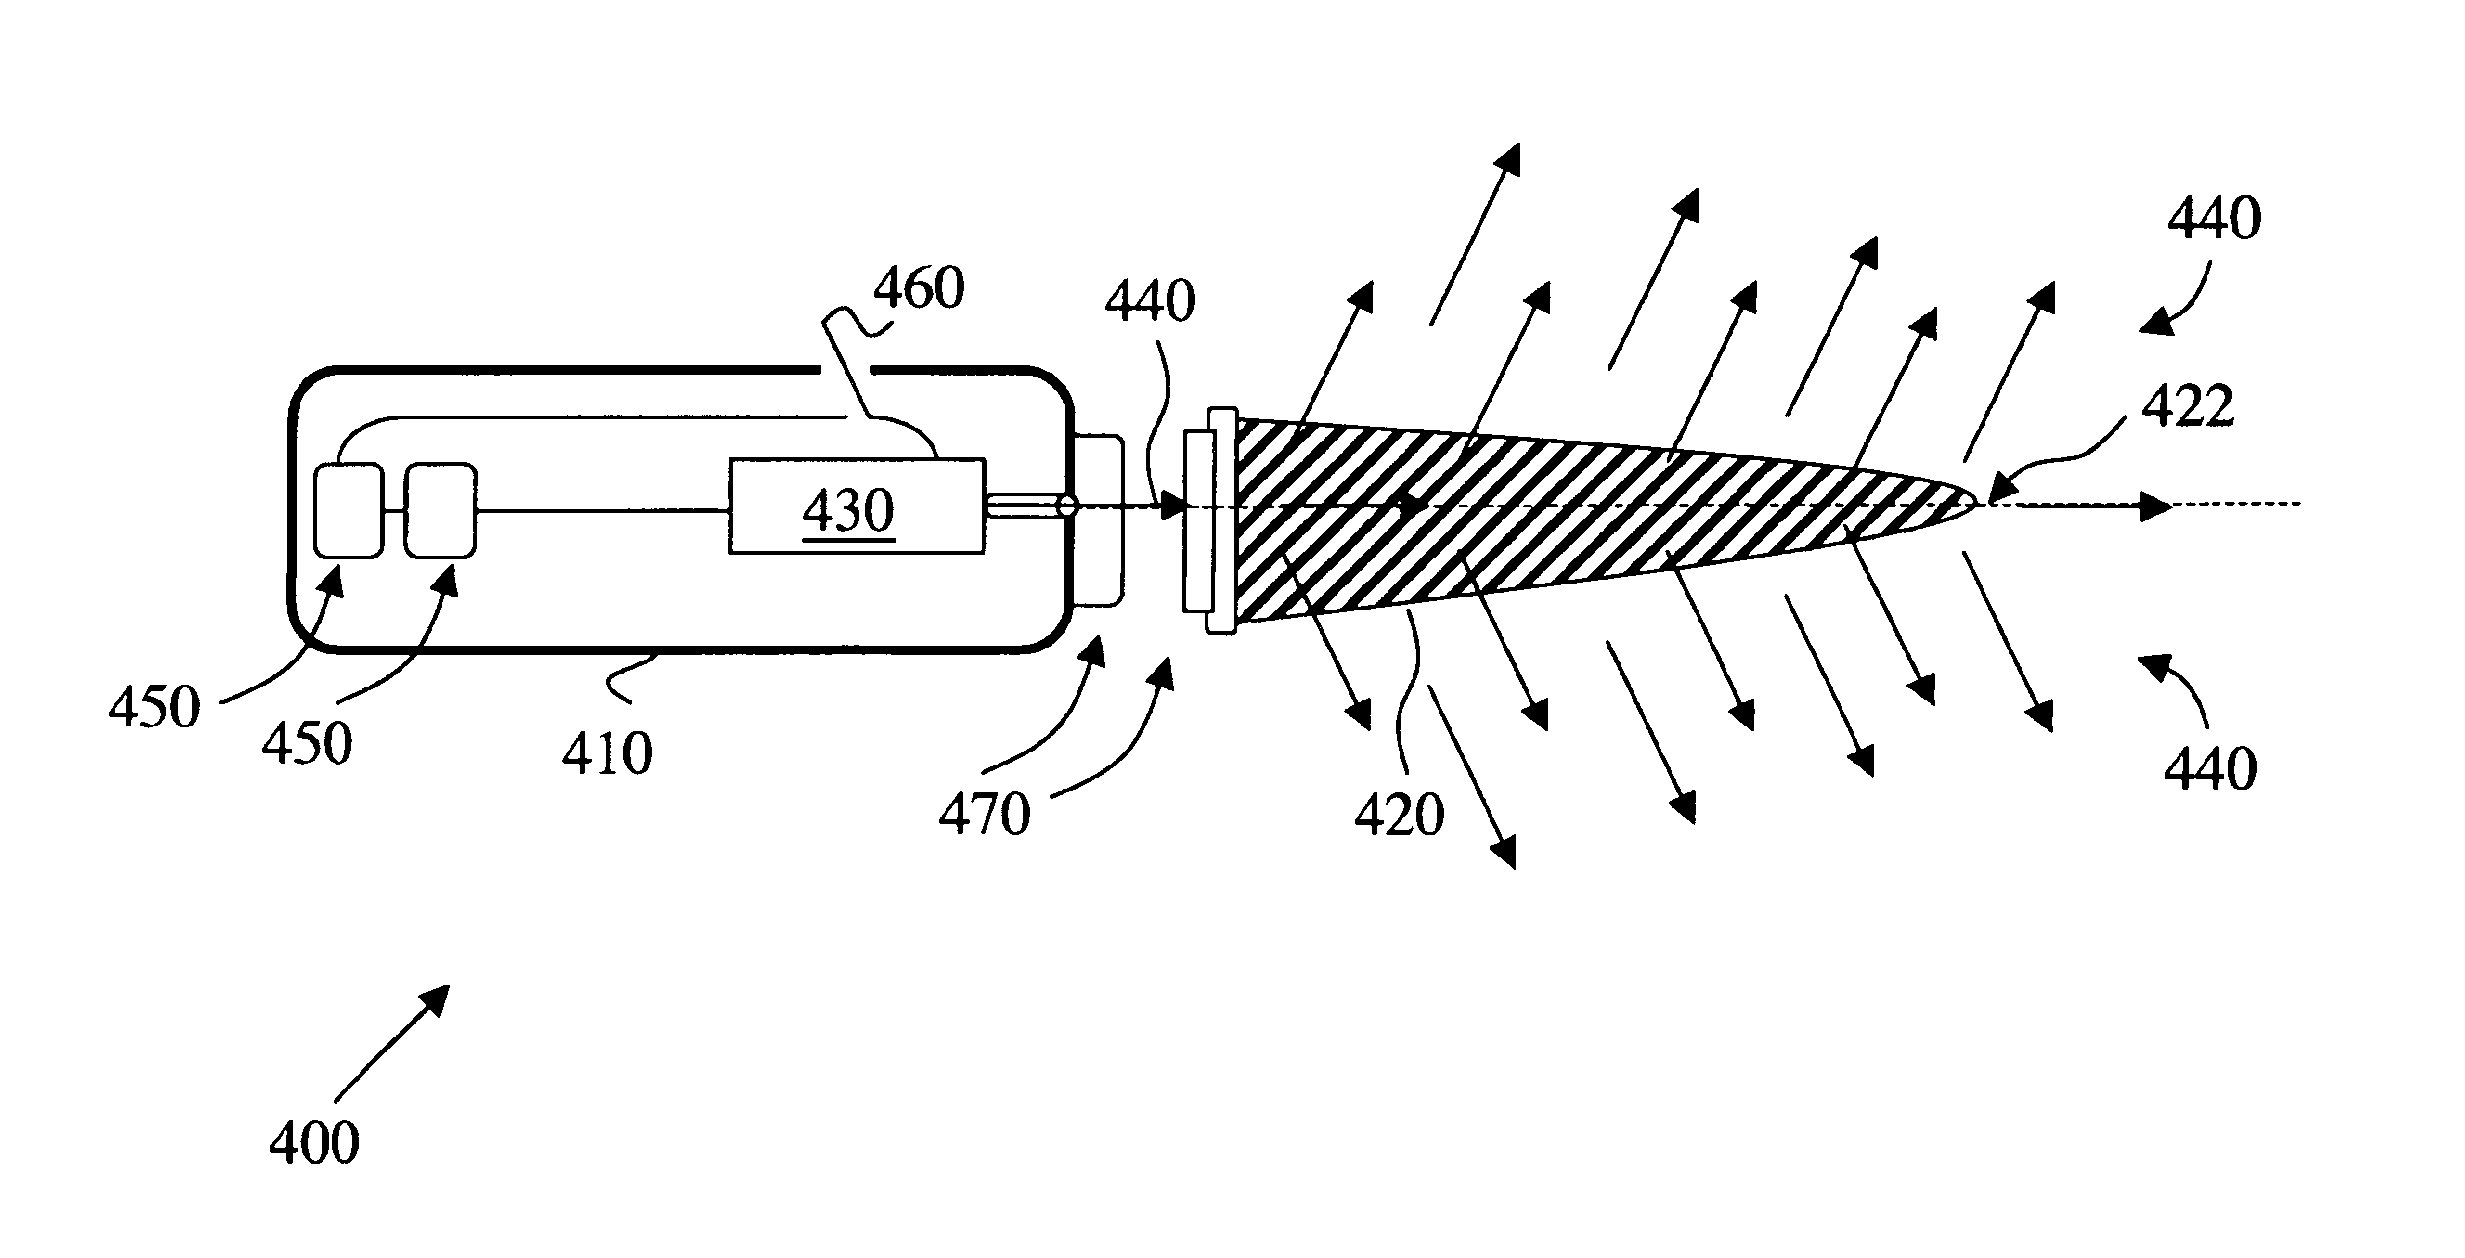 Toothpick for light treatment of body structures